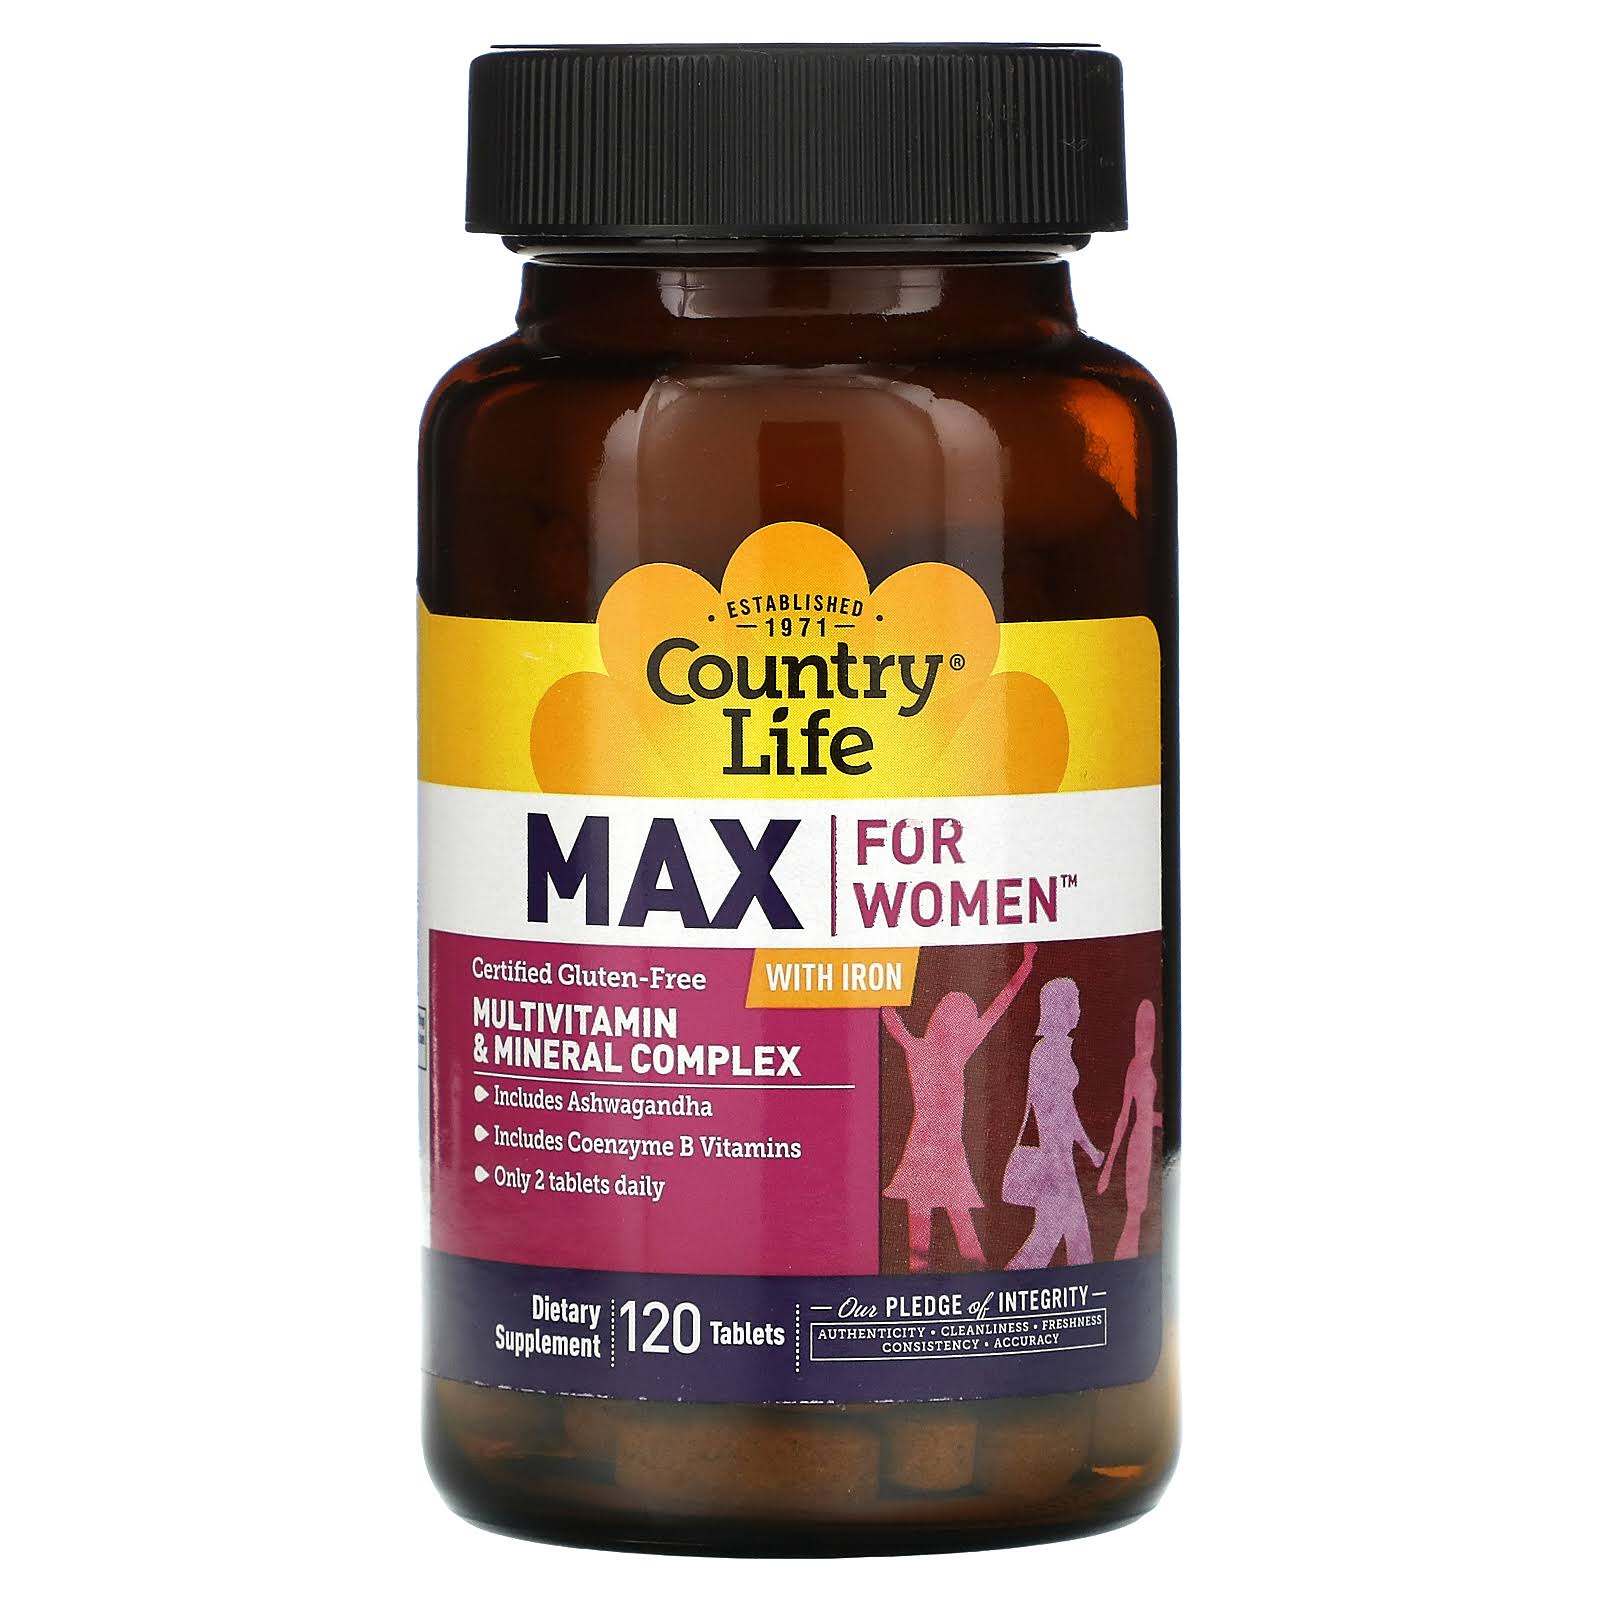 Country Life Max for Women Complex with Iron Multivitamin and Mineral - 120ct